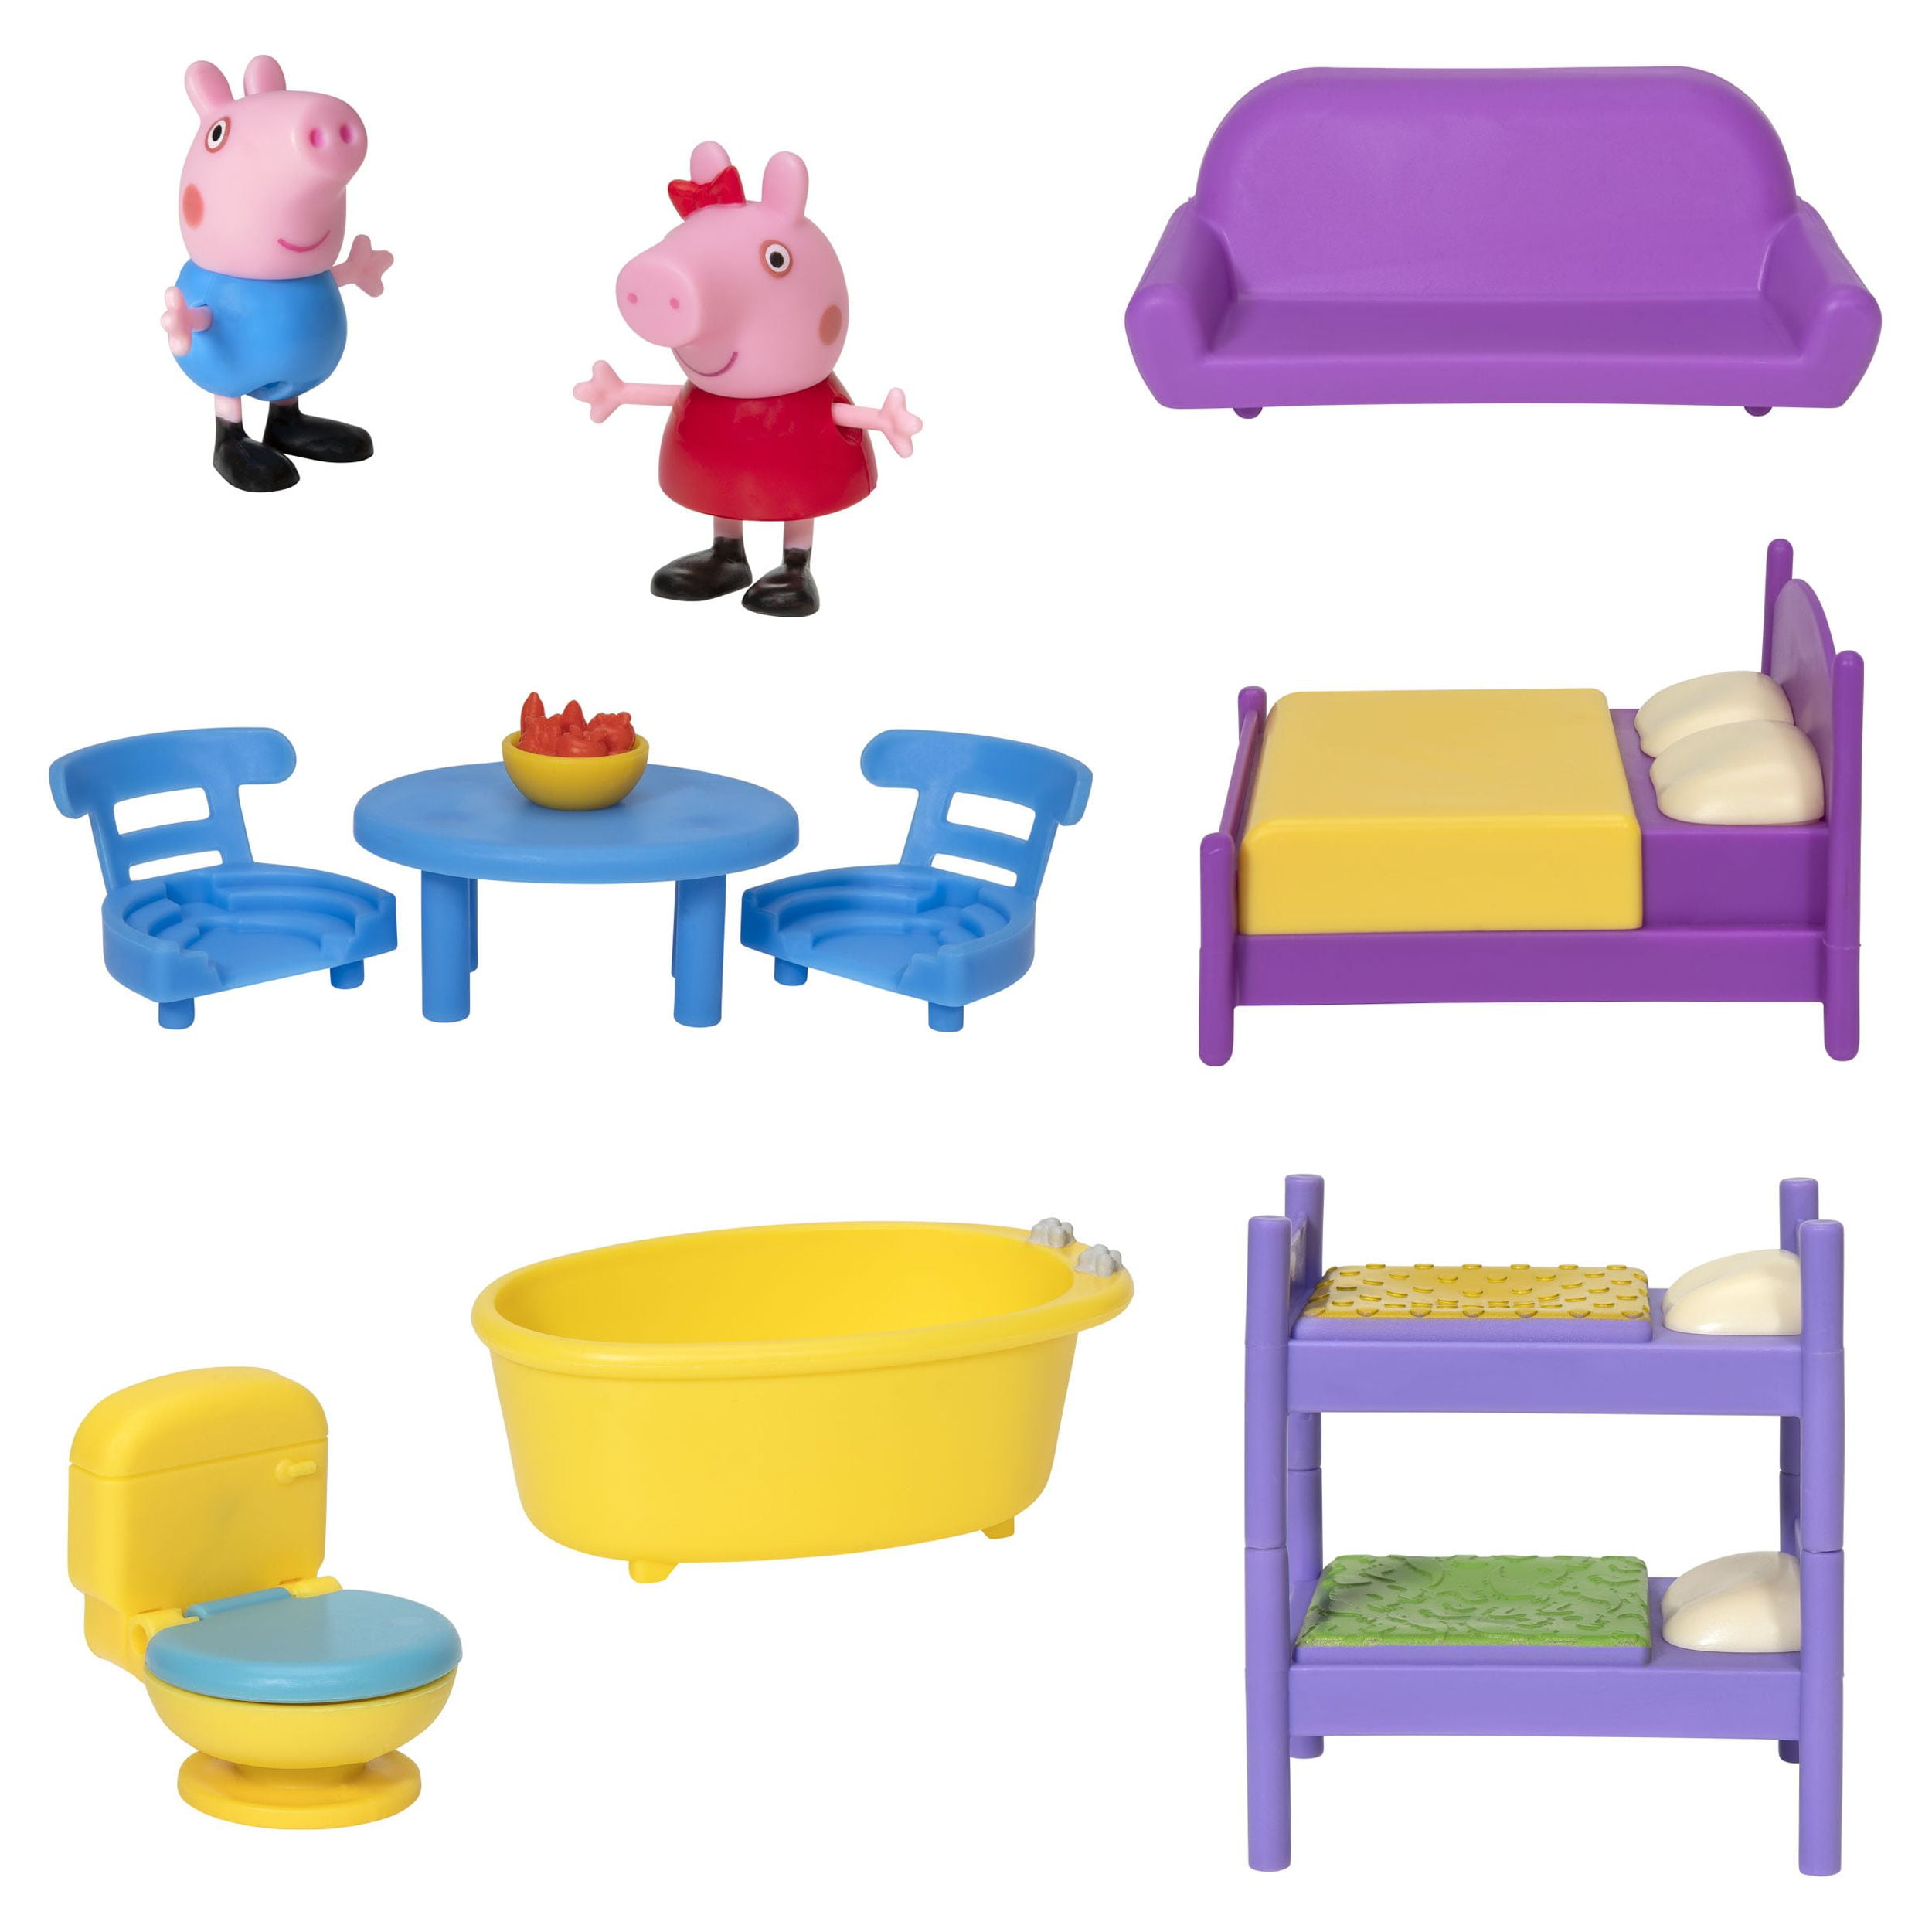 PEPPA PIG Peppa's Grandparents House Play Set Toy RARE! Ages 3+